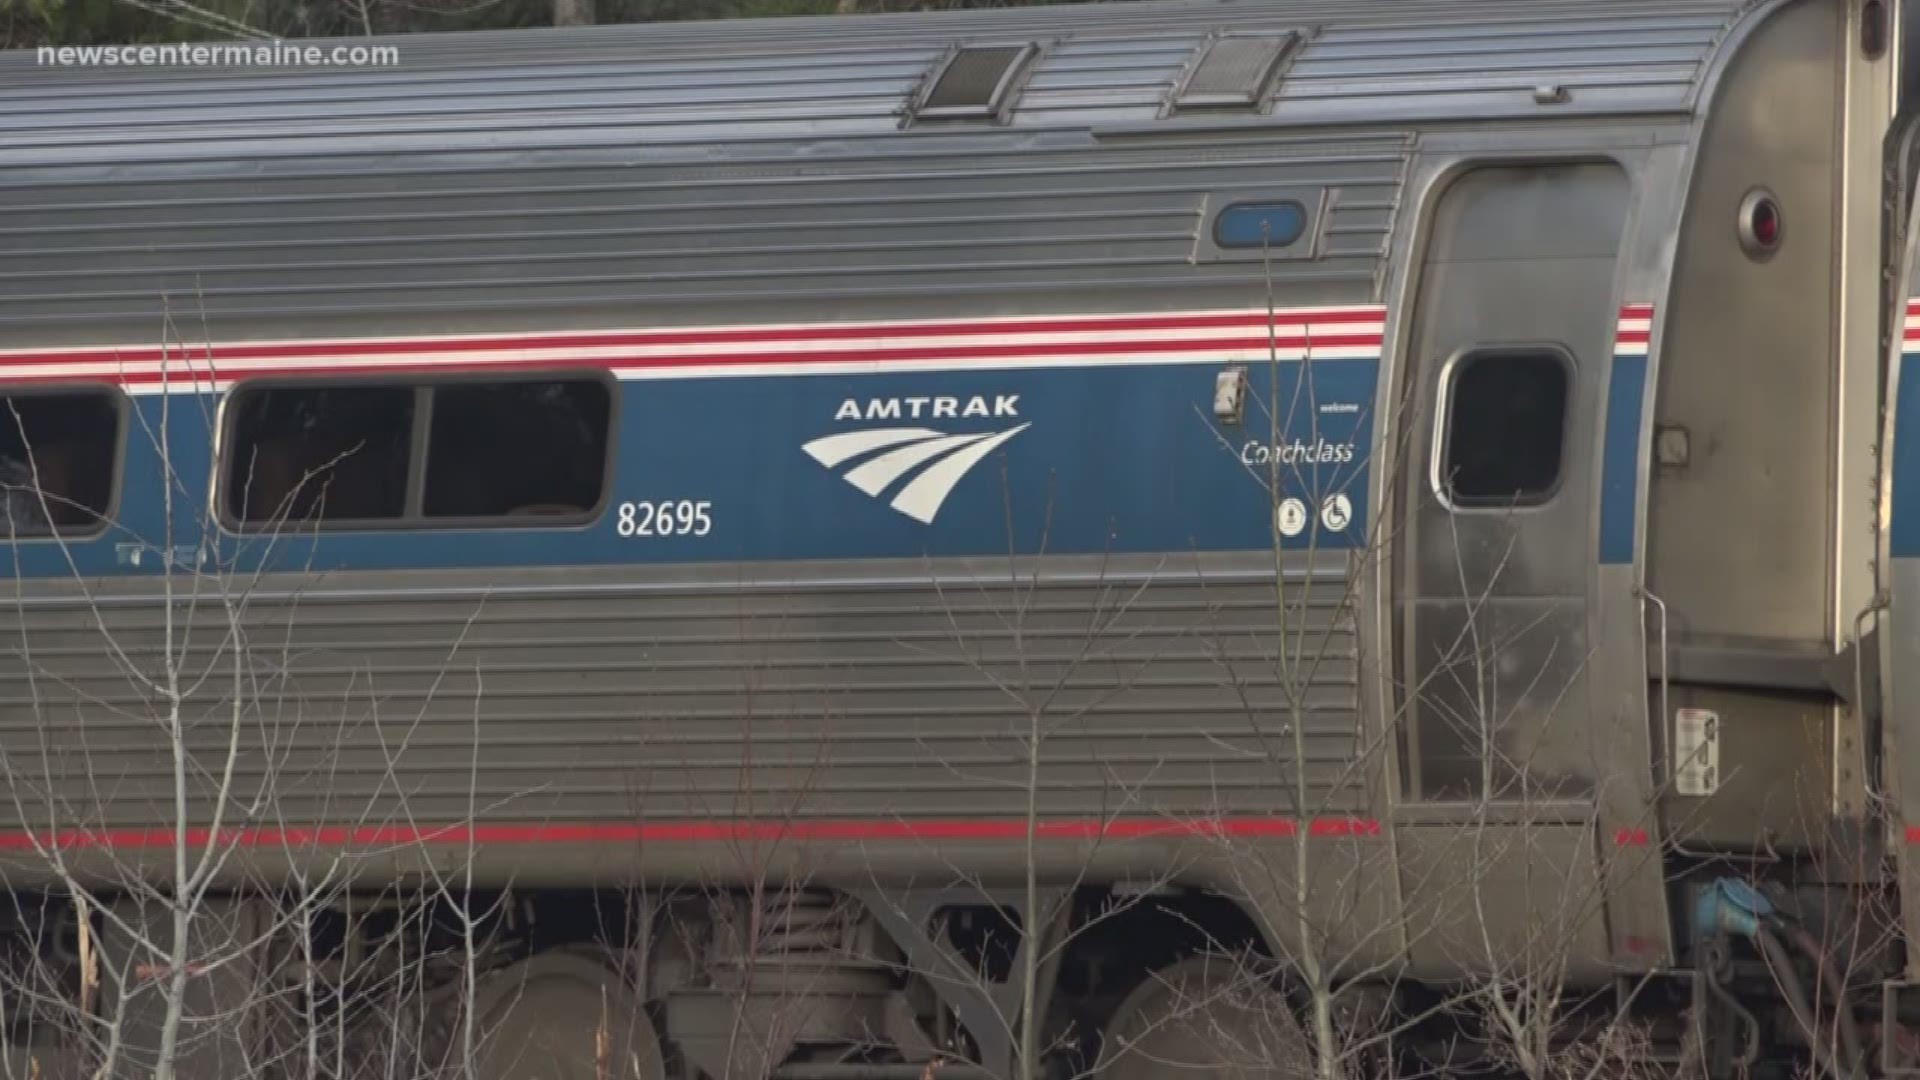 Police have released the identity of a man from Biddeford, hit and killed by an Amtrak train last weekend.